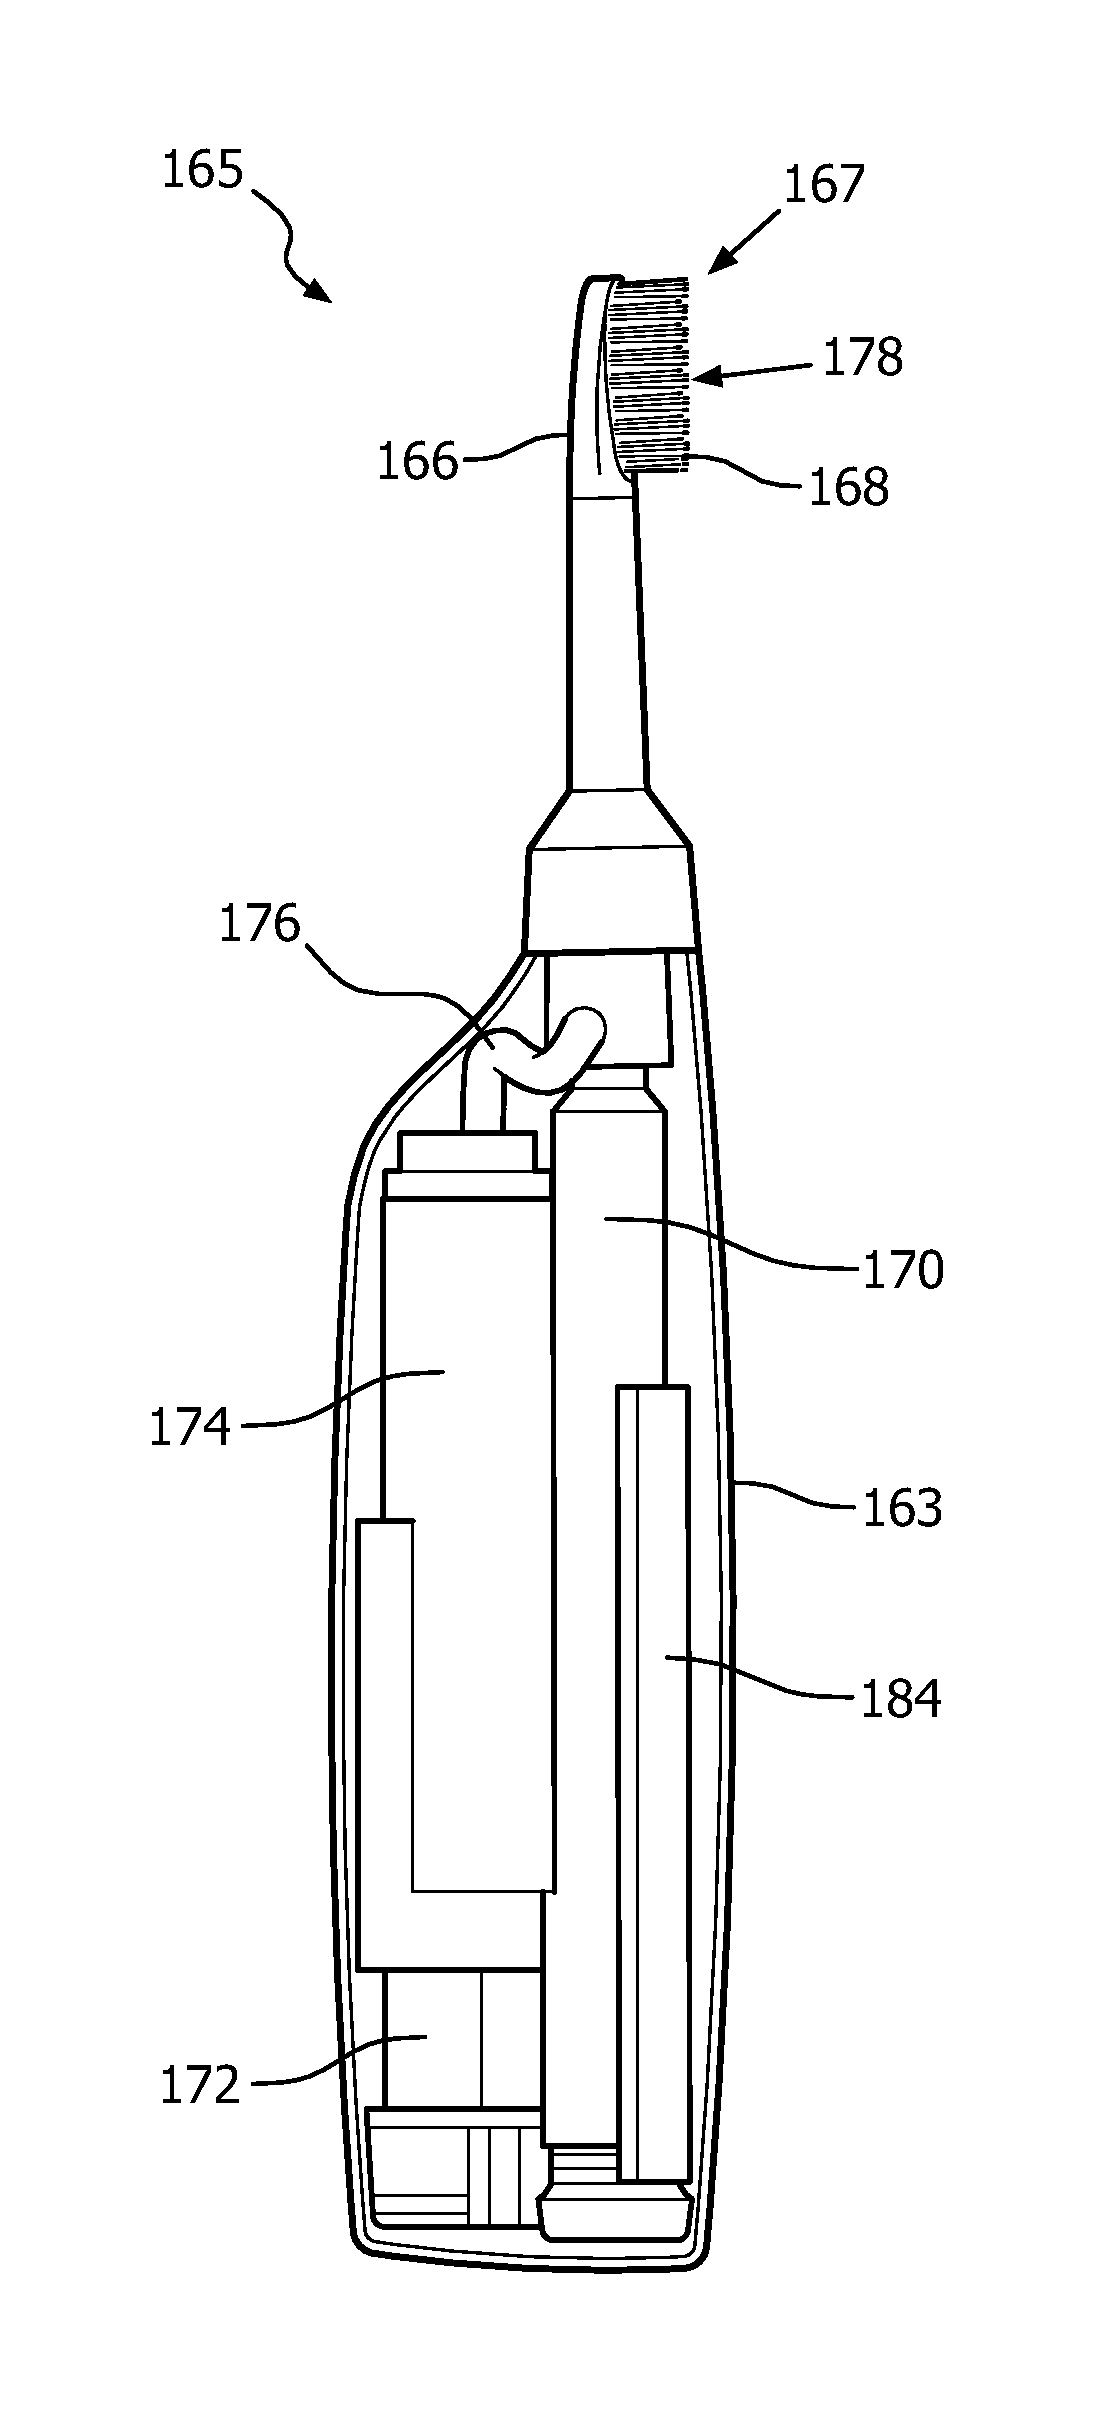 An oral care appliance using a jet-type fluid flow and mechanical action